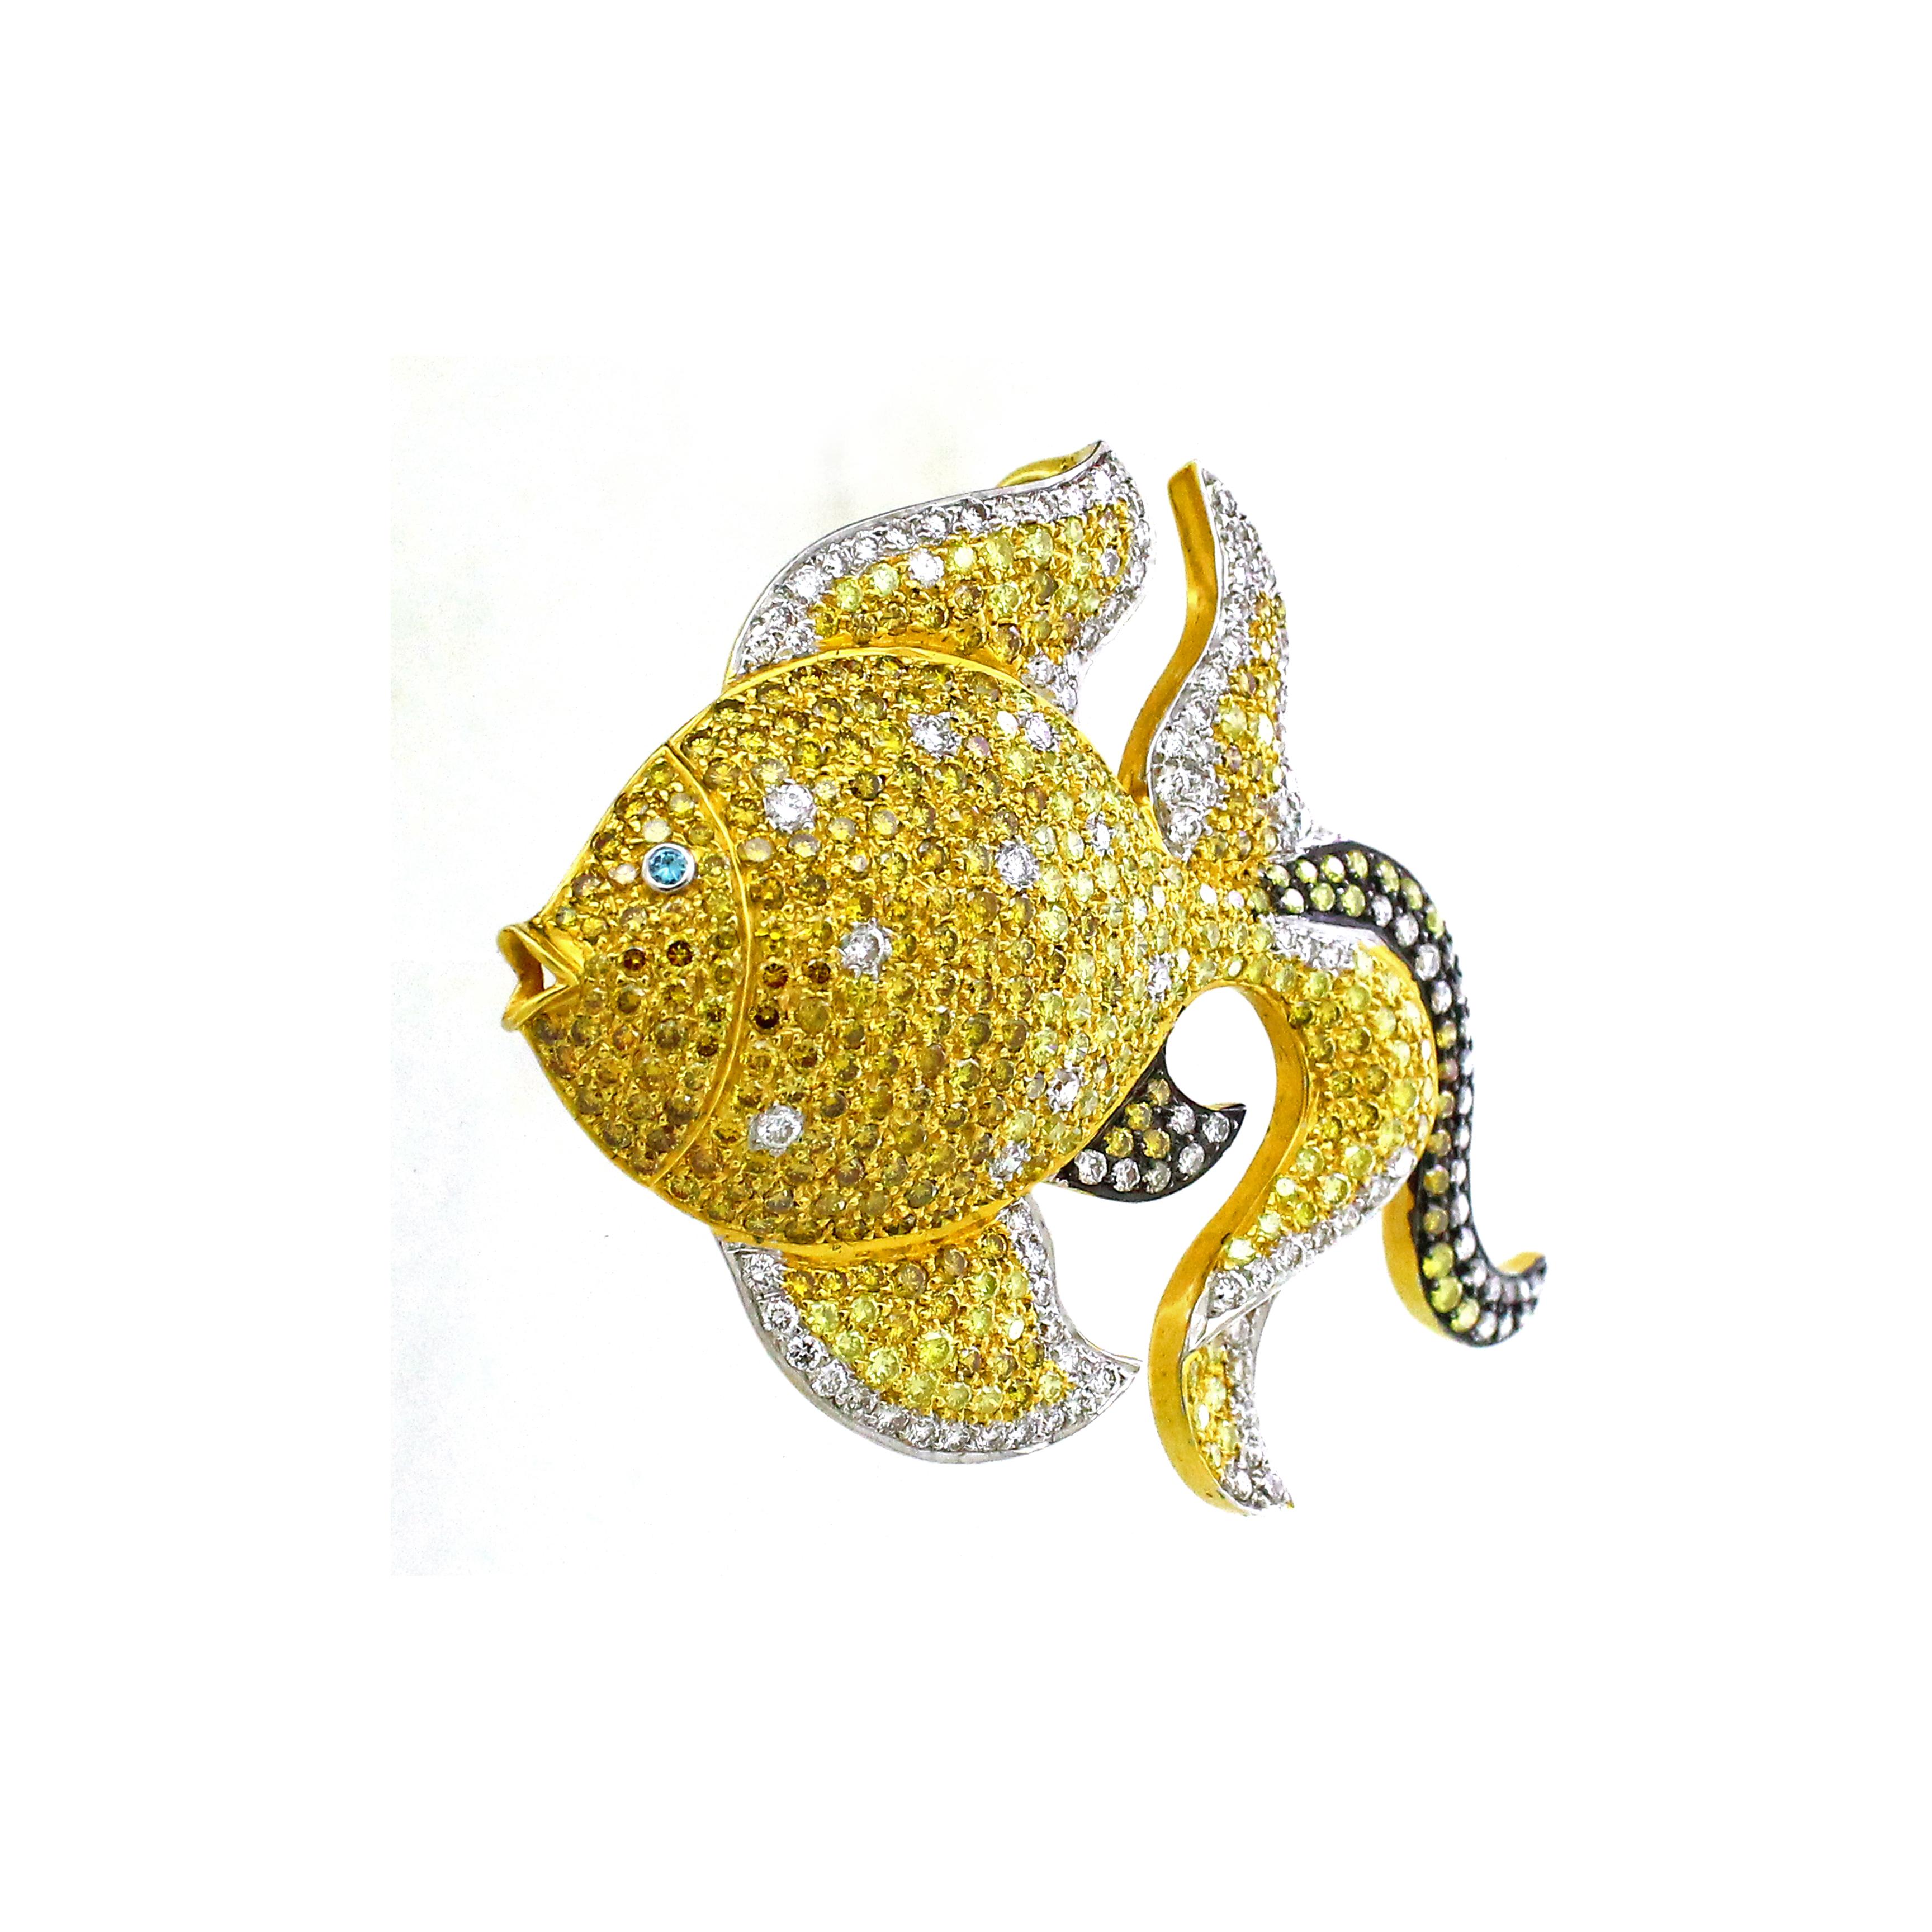 Dive into a sea of elegance with this enchanting fish-inspired brooch, a testament to exquisite artistry and unparalleled craftsmanship. Crafted in 18K yellow gold, weighing 19.88 grams, this unique piece captures the fluidity and grace of aquatic